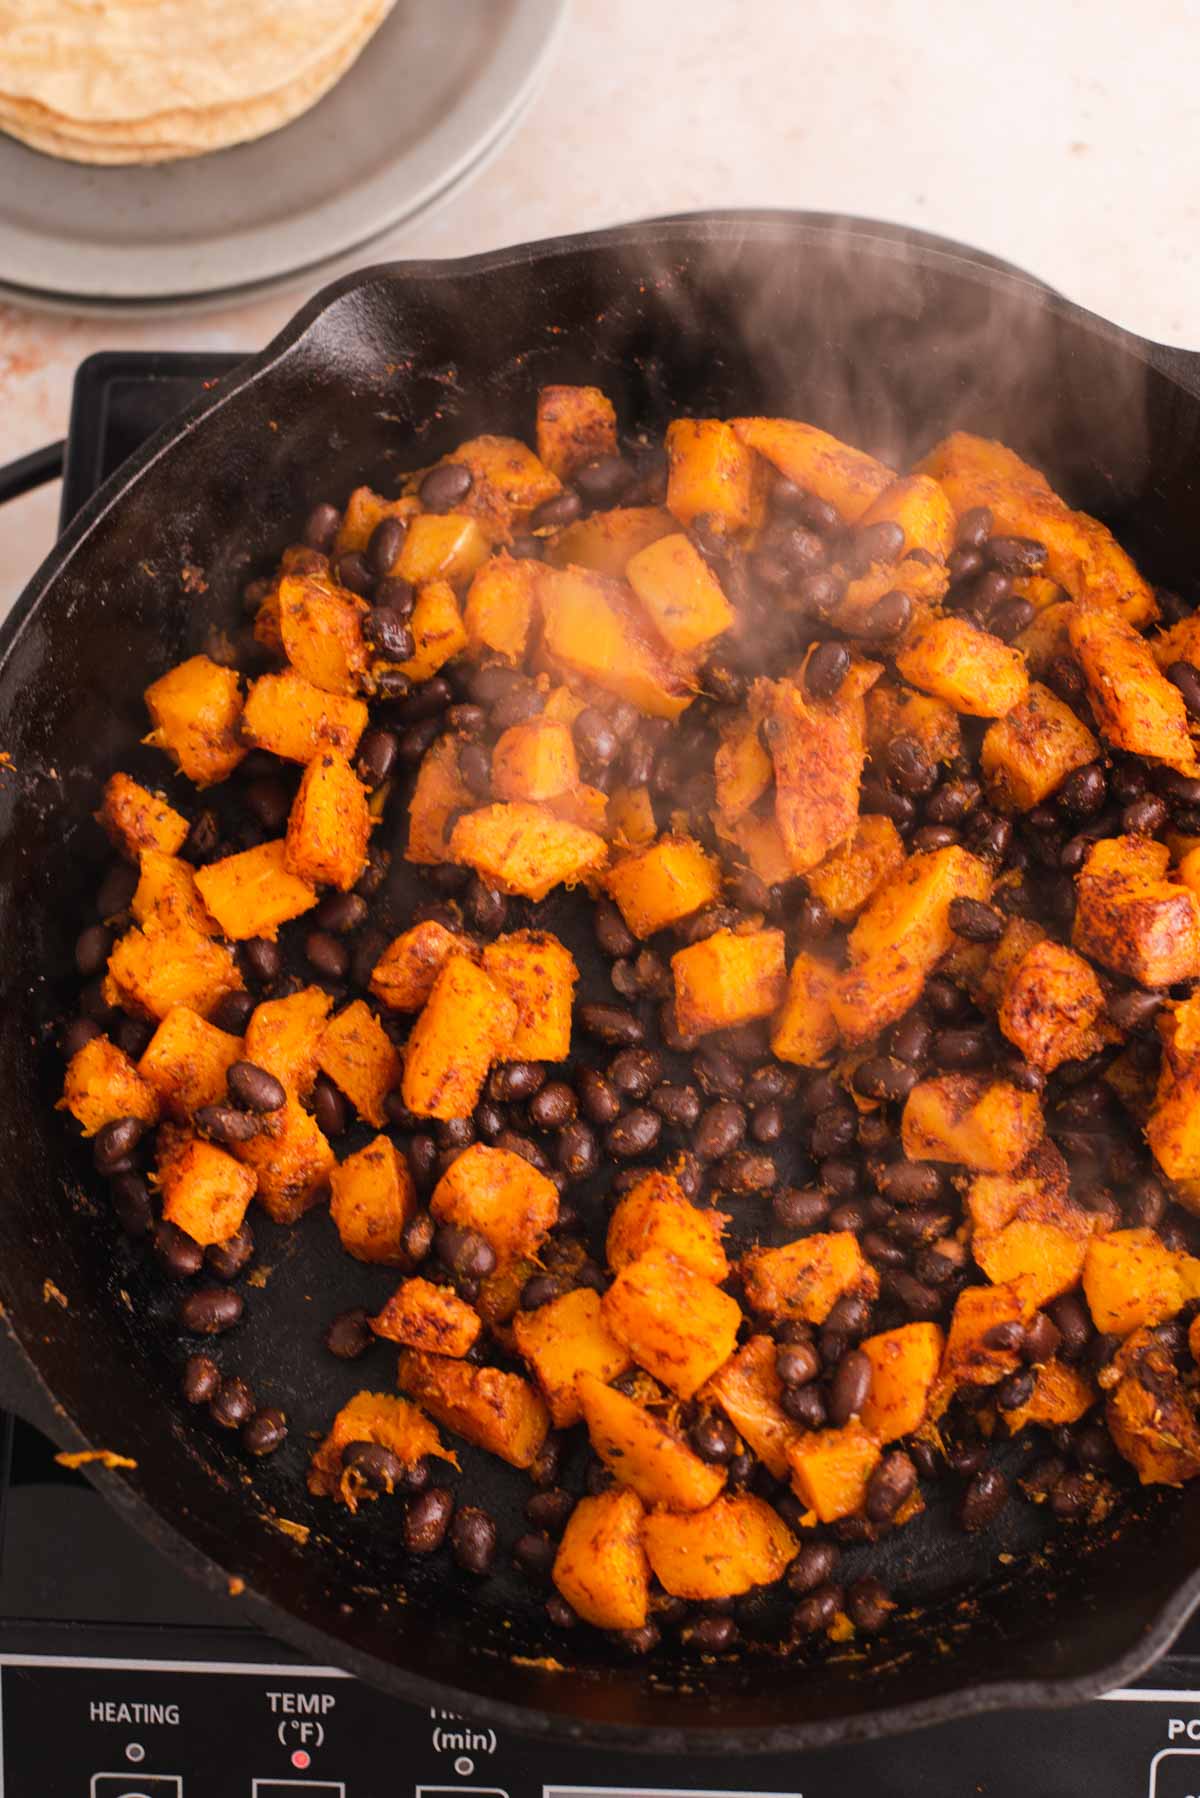 Diced butternut squash and black beans cooking in a black cast iron skillet